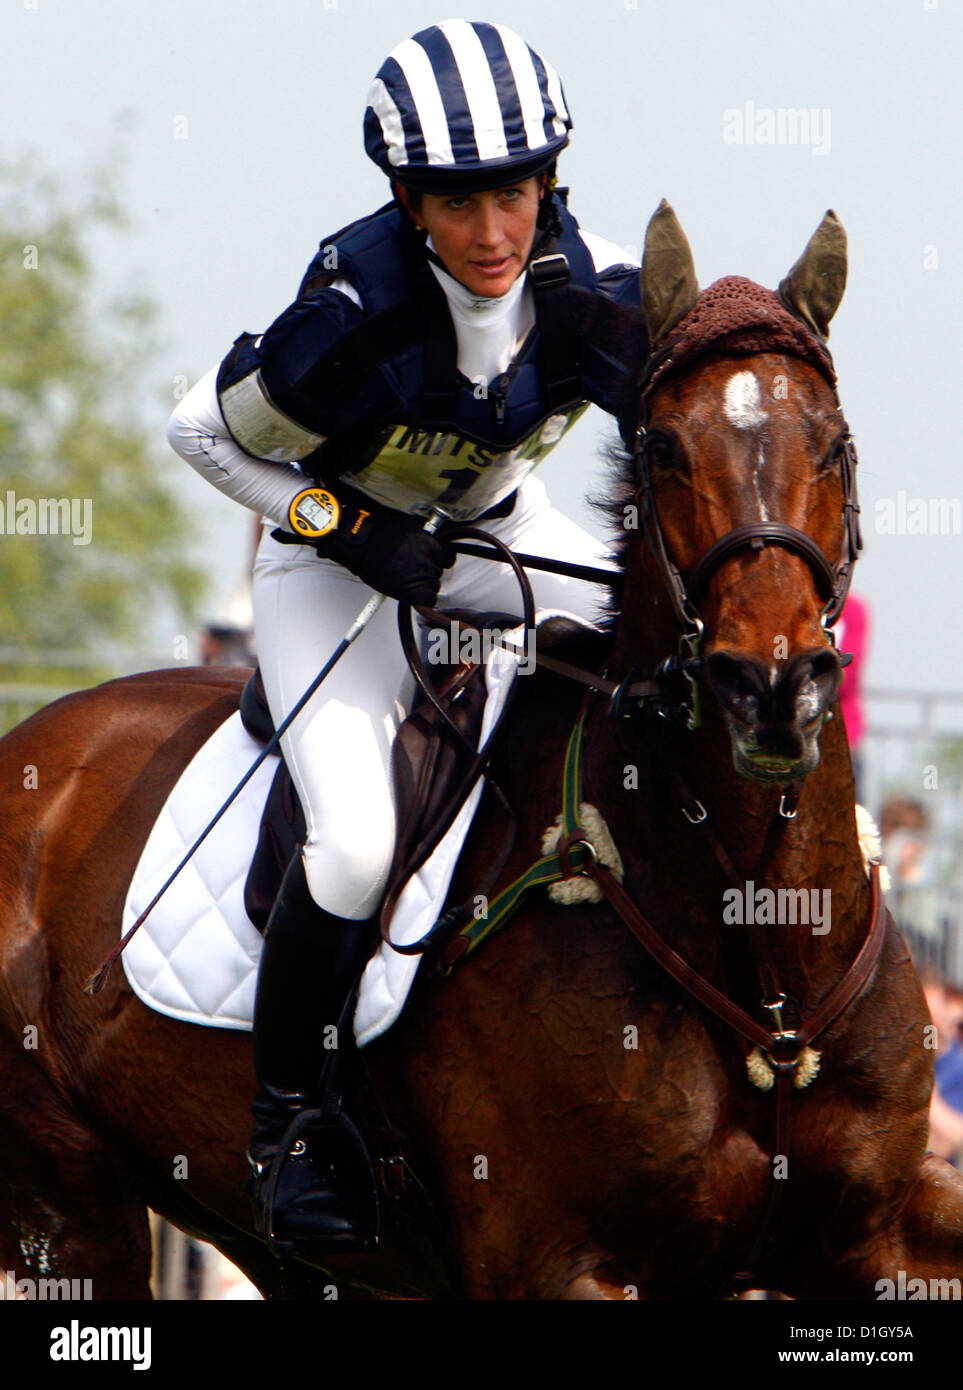 24.04.2011 Carroll Powell on Boston Two at Badminton Horse Trials Credit James Galvin Stock Photo